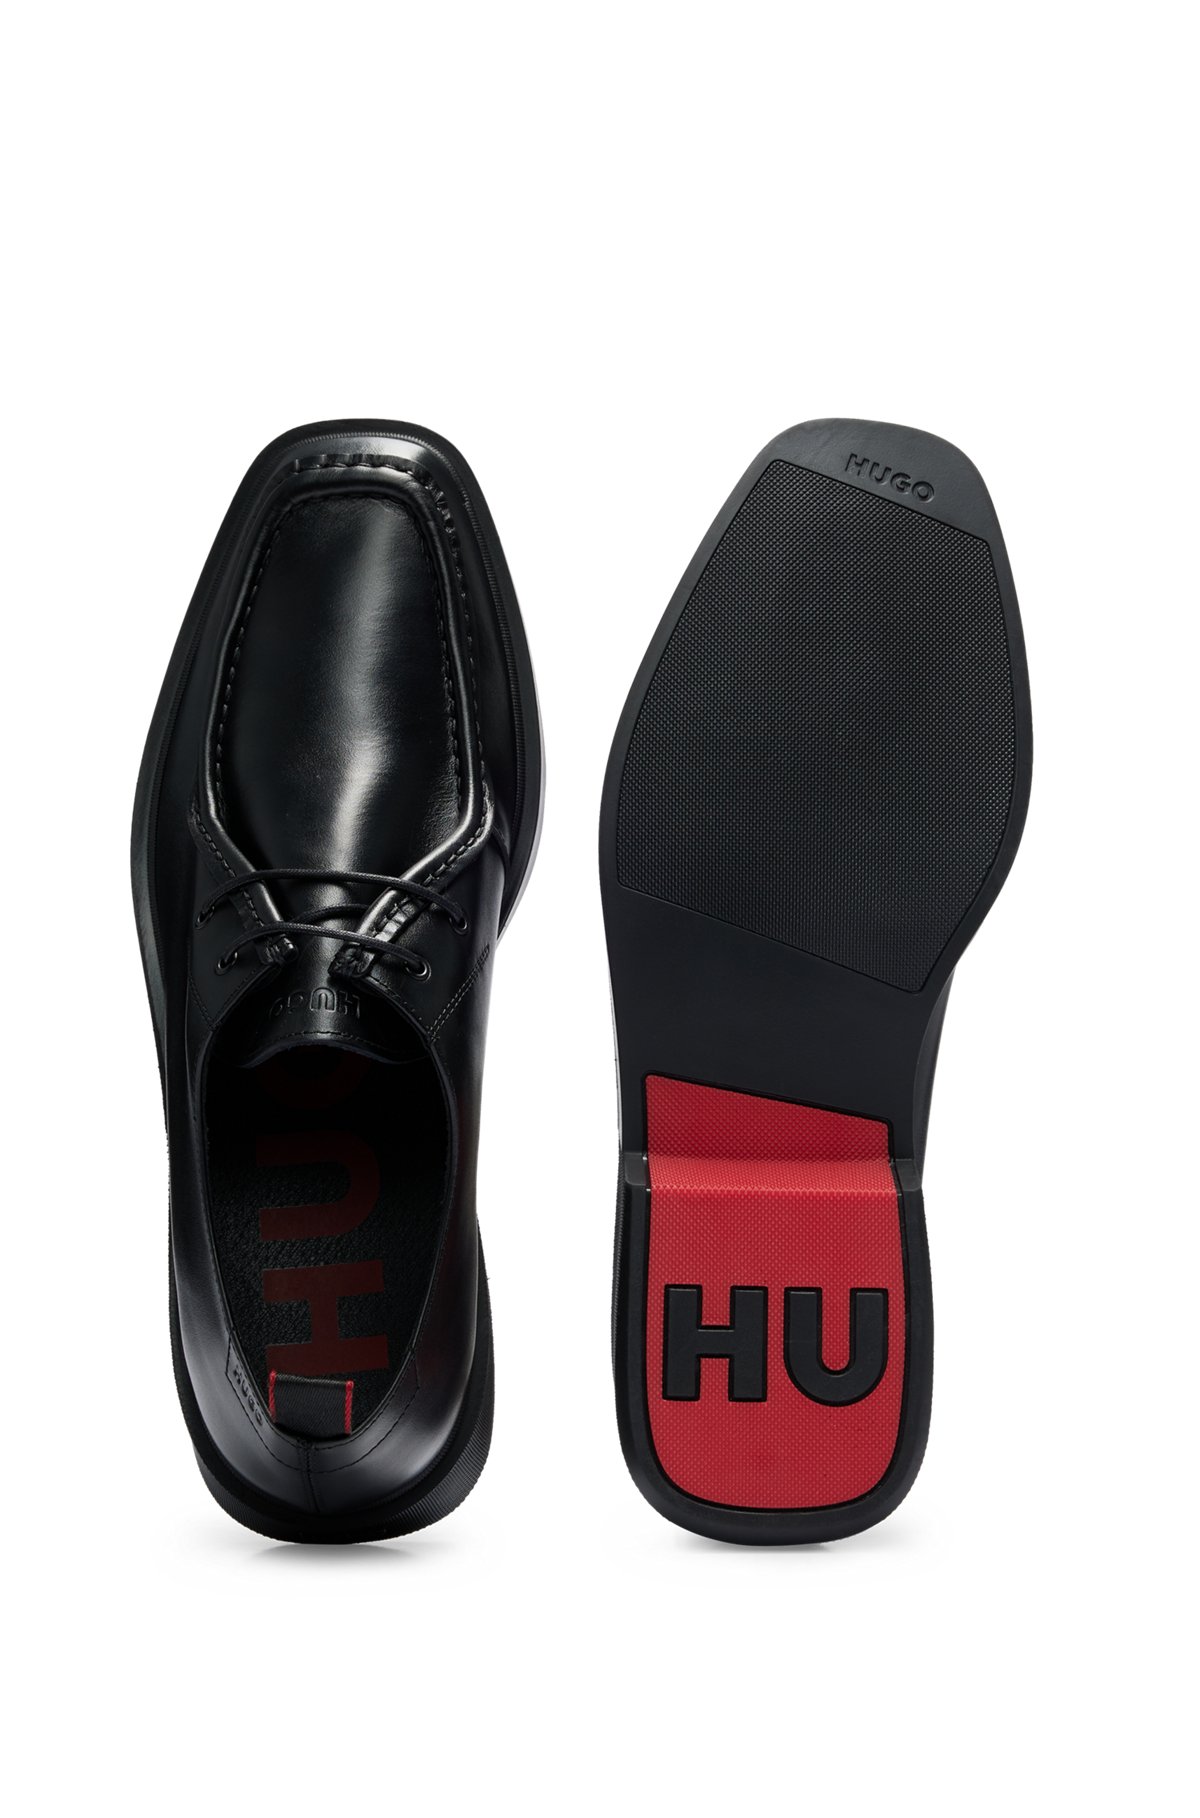 Leather Derby shoes designed in Portugal with embossed logos, Black